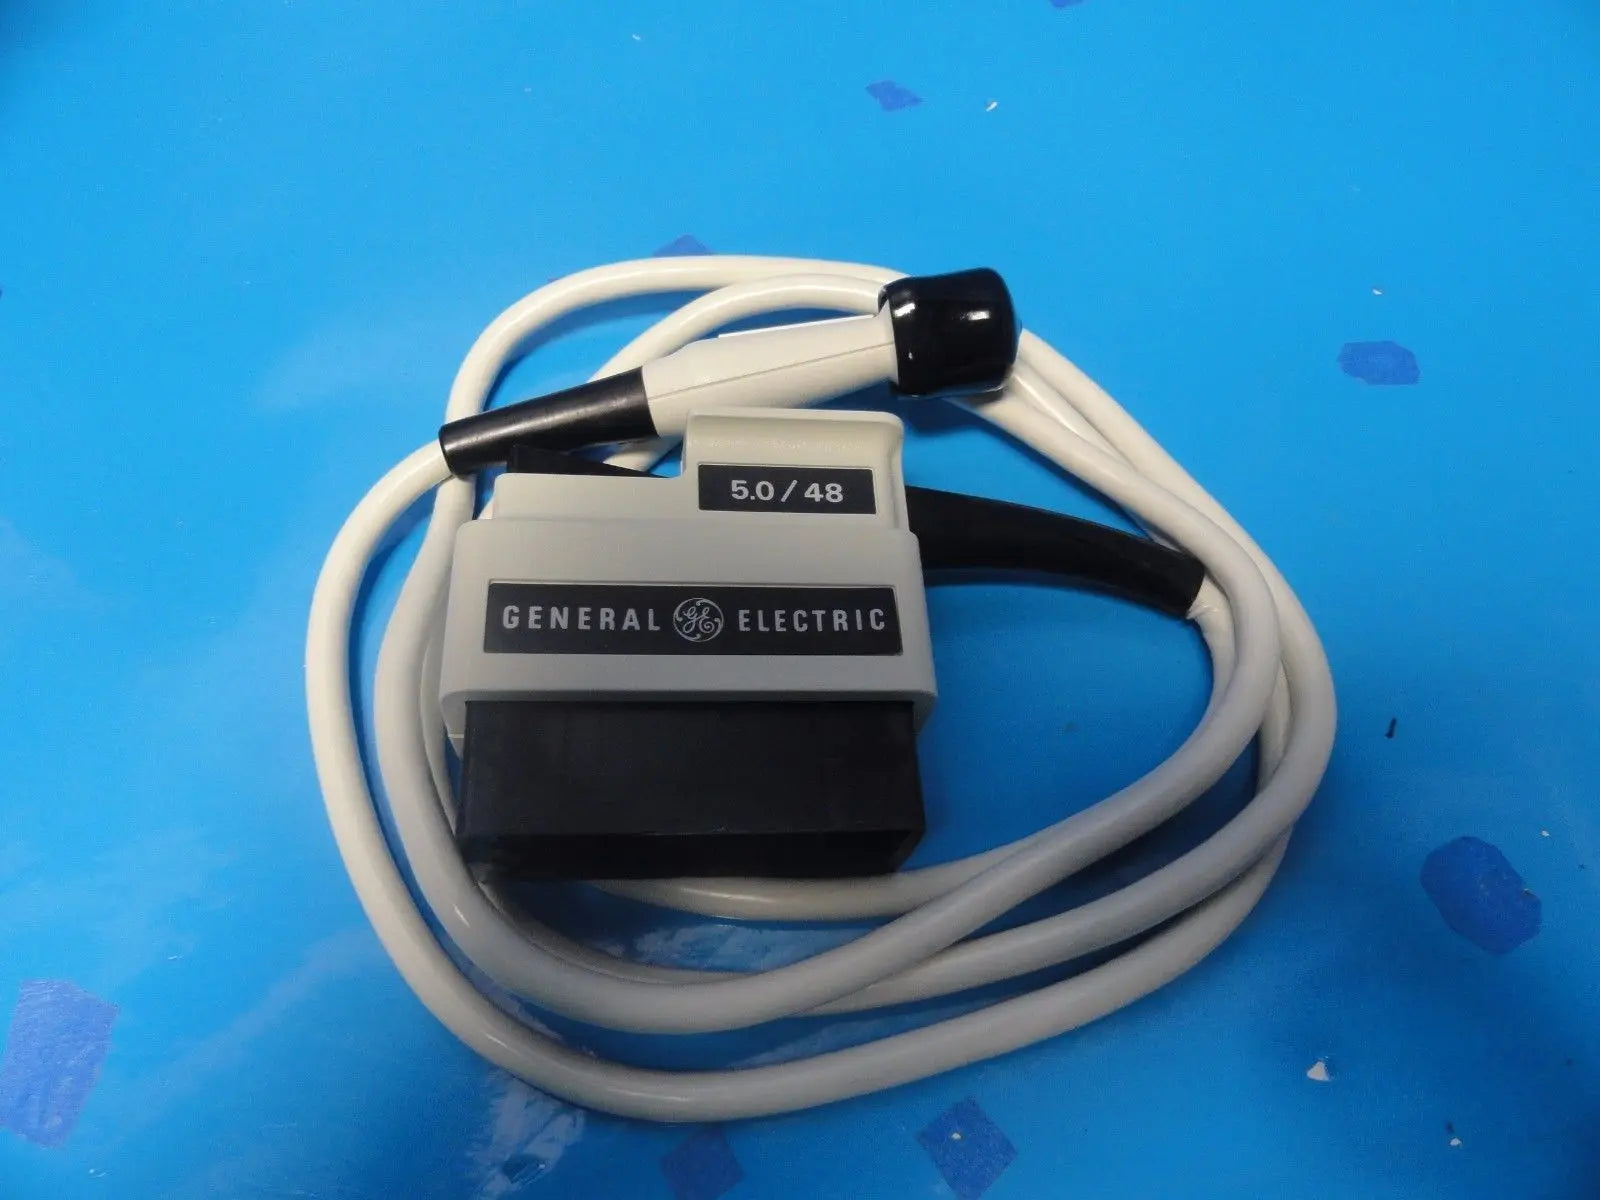 GE 5.0 / 48 P/N 46-231616G1 Sector Array Ultrasound Transducer (10544) DIAGNOSTIC ULTRASOUND MACHINES FOR SALE